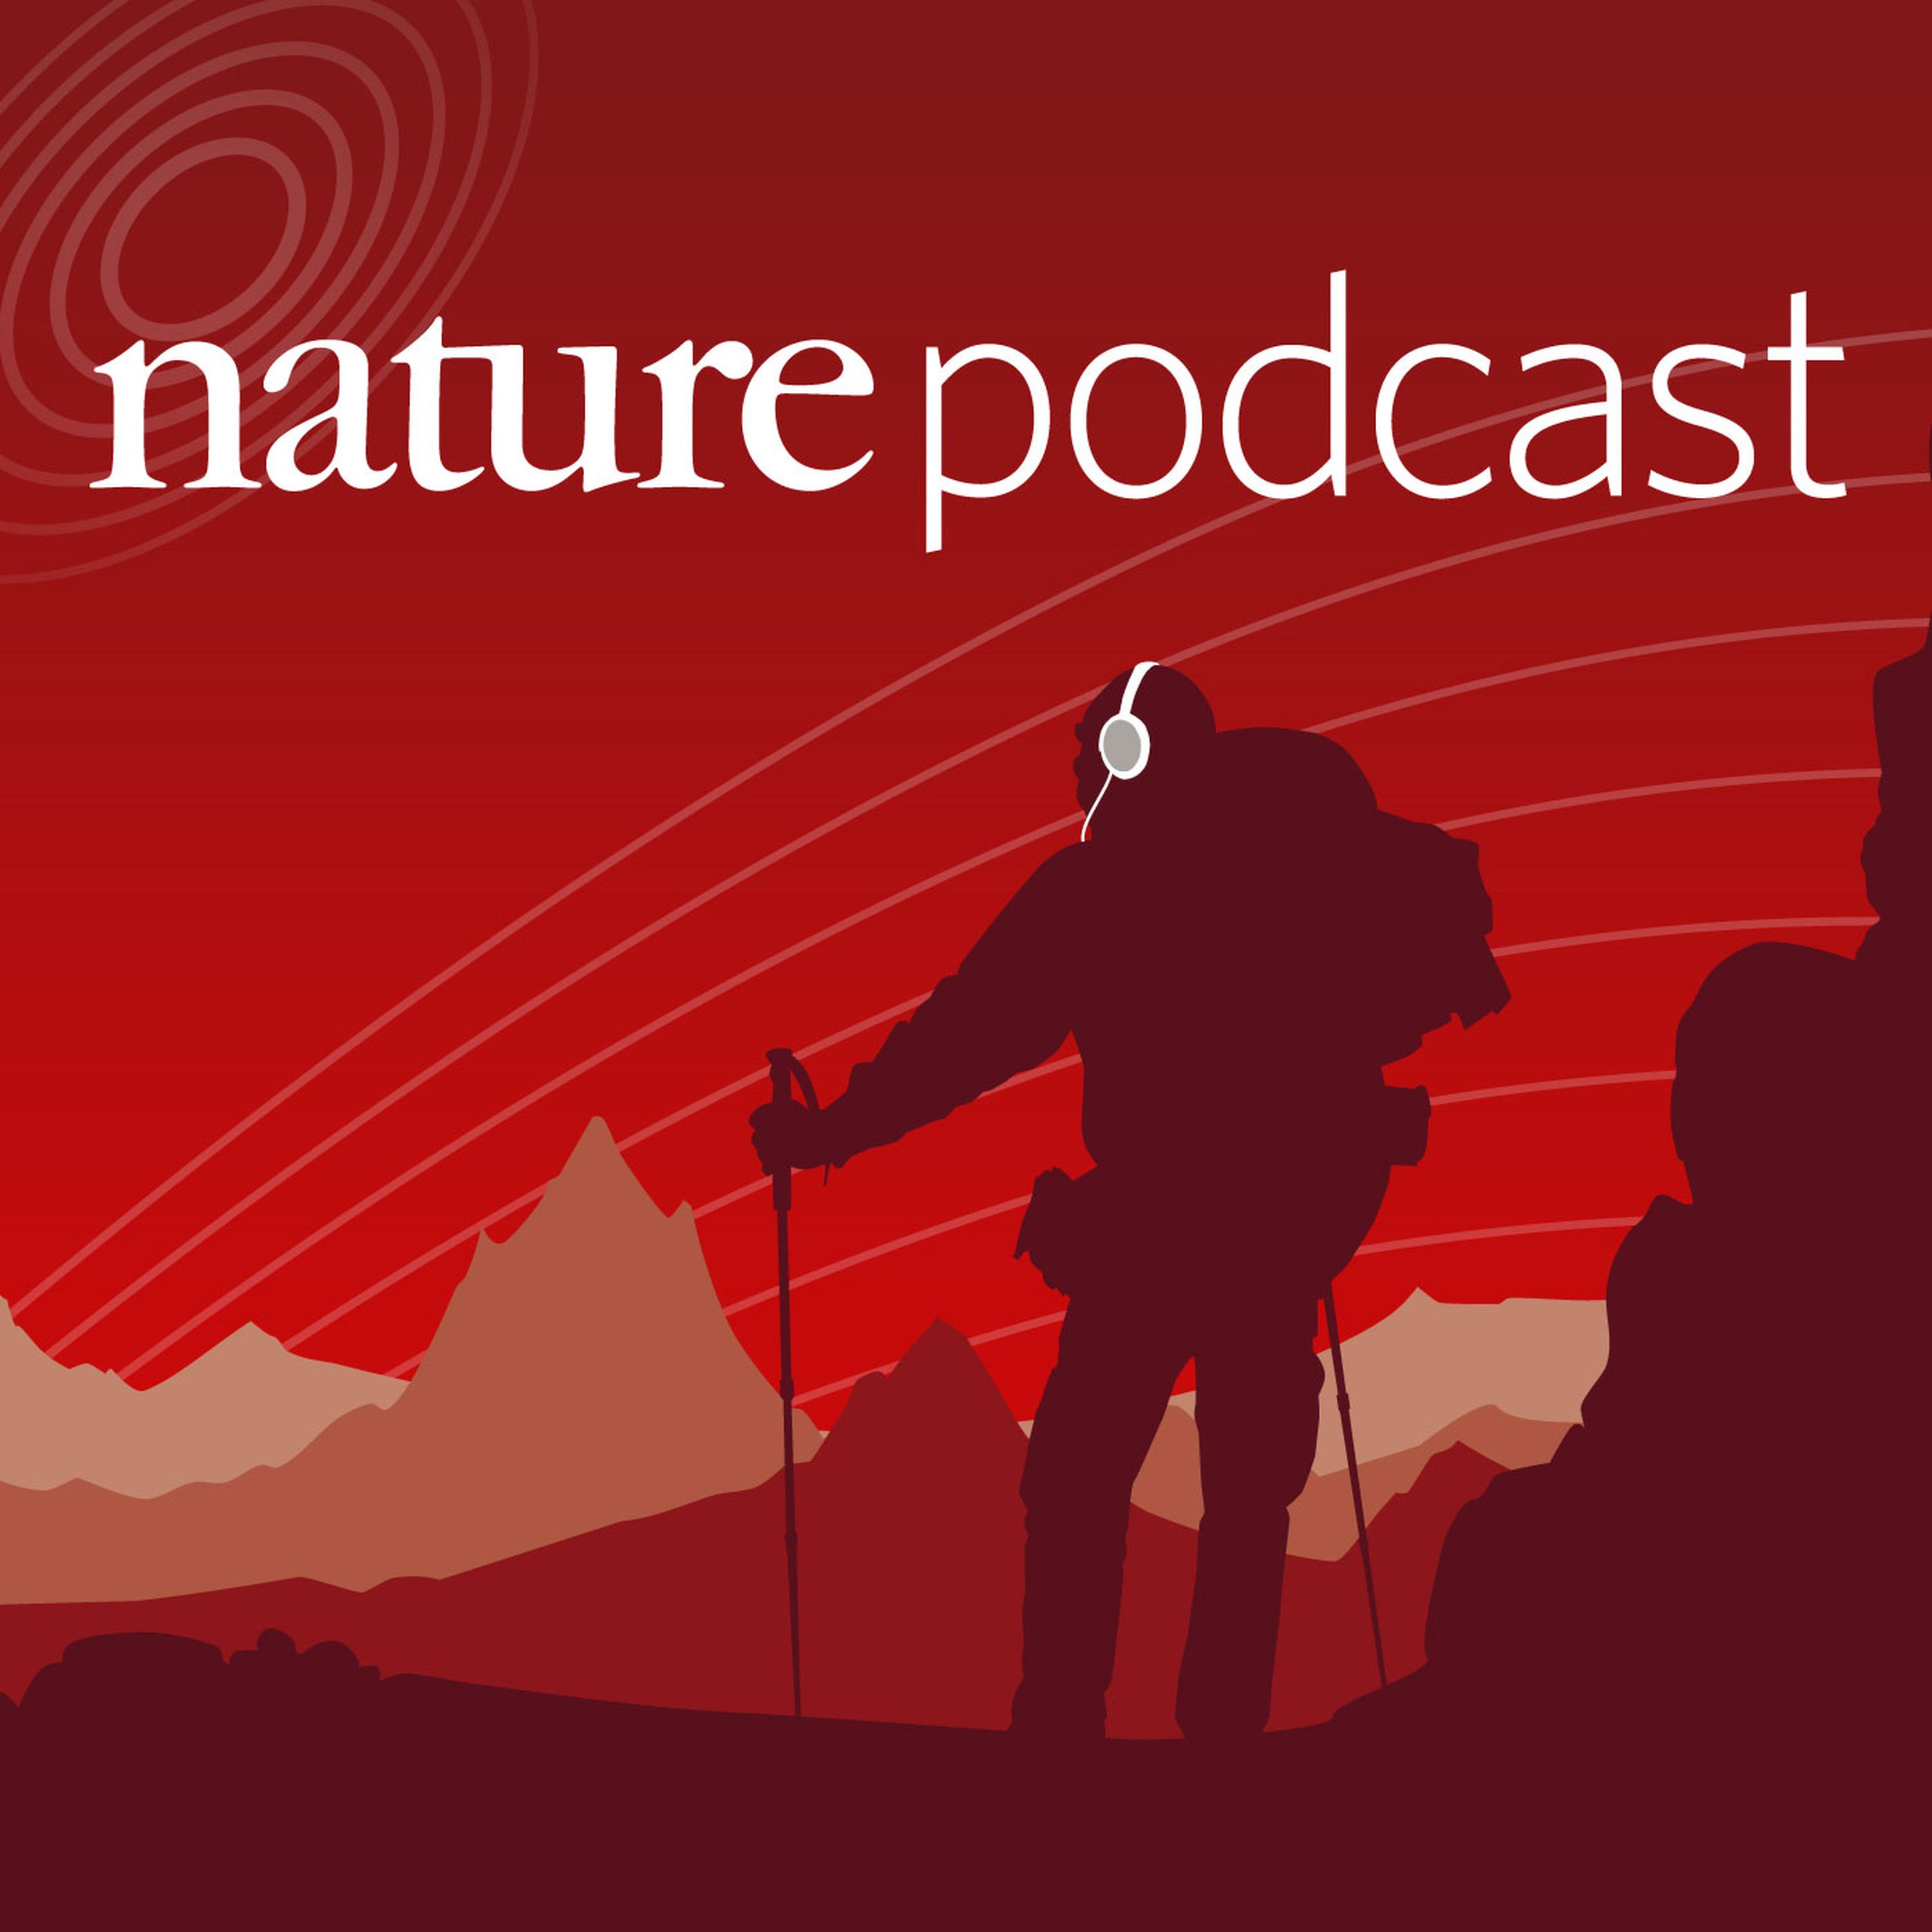 Nature Podcast: 15 October 2015